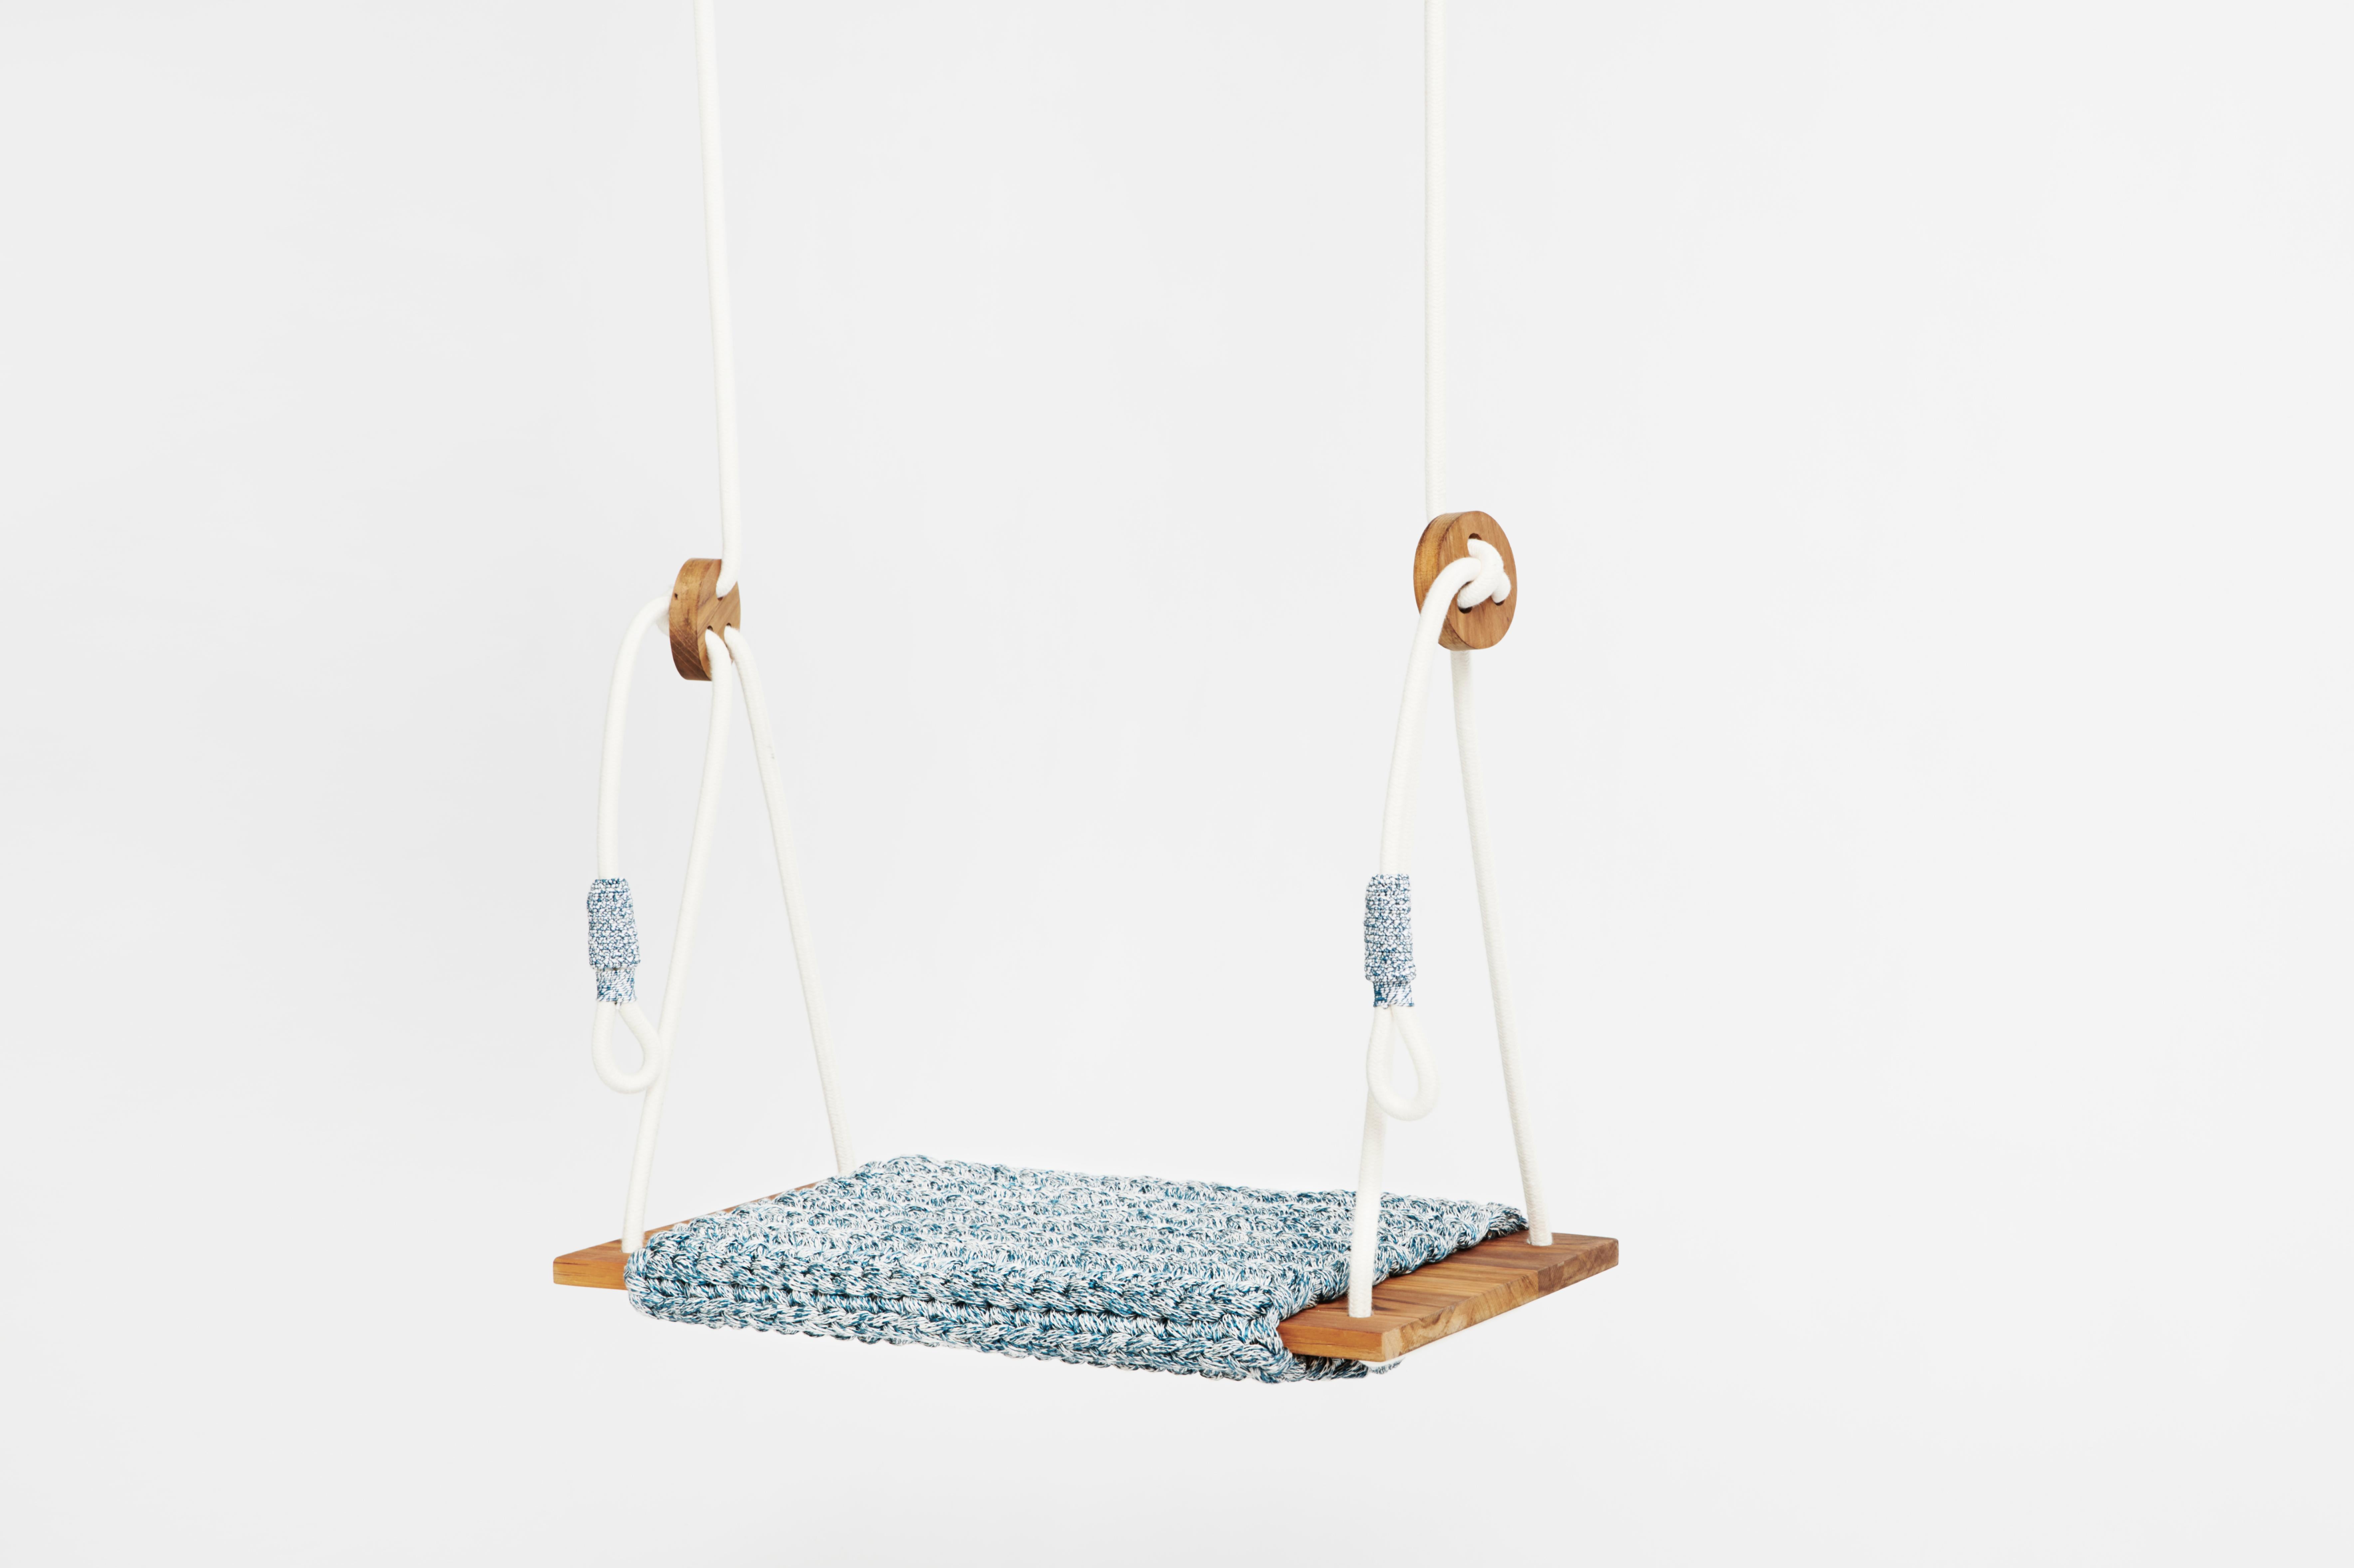 The iota rug swings are chic and minimalistic. They have a luxurious crochet rug covering a teak wood seat. The rugs are hand knit from exclusive iota bespoke yarn using UV protected acrylic and polyester making them suitable for the outdoors as